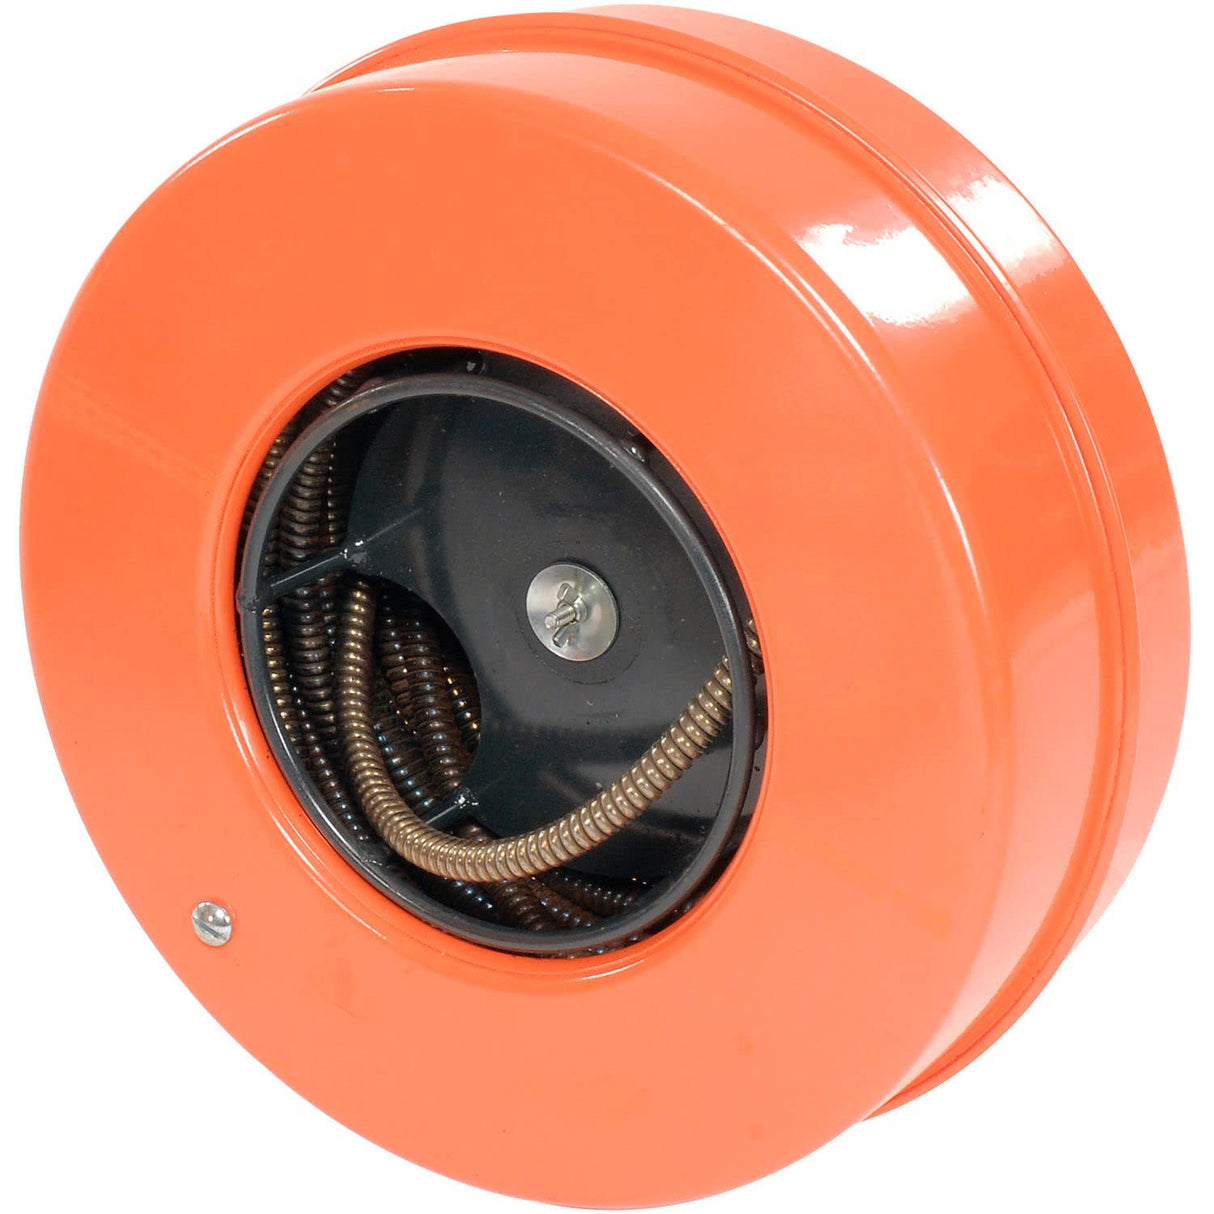 General Wire P-S92-A Speedrooter 92 Package w/ Power Cable Feed, Guide Tube, 100EM5 (100' x 3/4") Cable, 100EM3 (100' x 1/2") Cable Installed in Small Drum, COCS Cutter Set